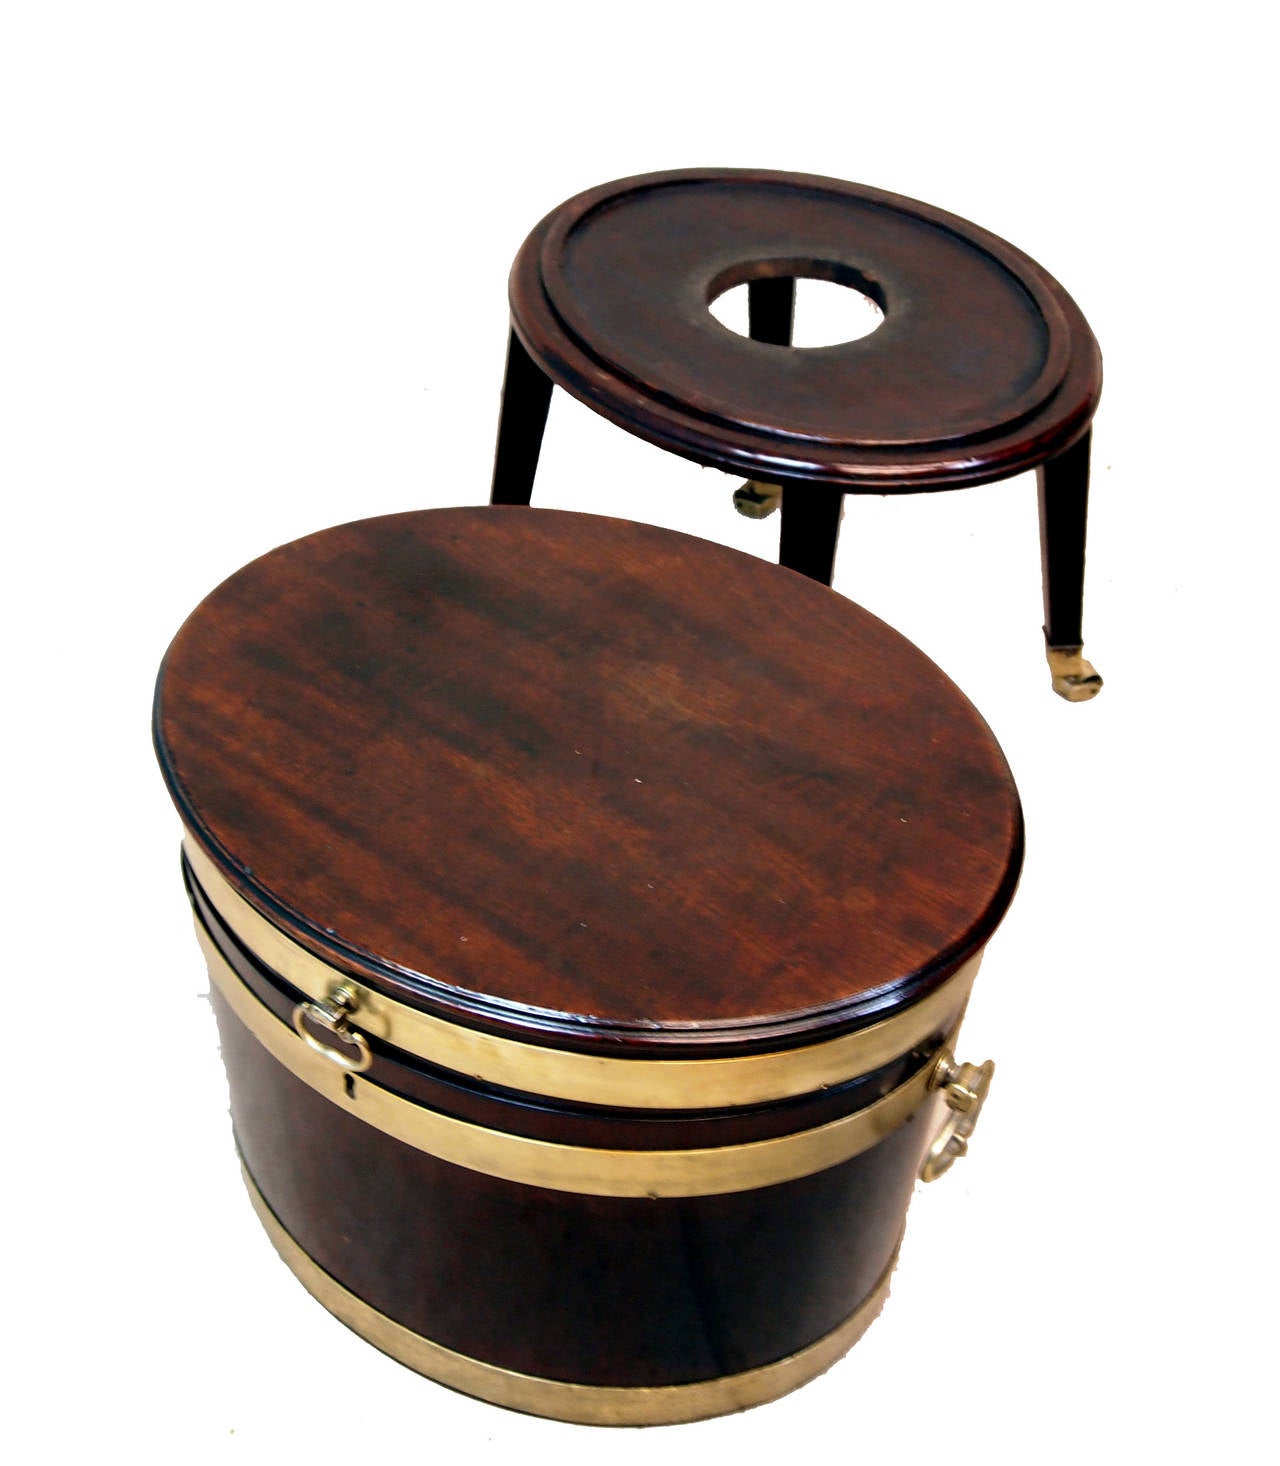 A fine quality George III period mahogany oval wine cooler having
well figured hinged lid, original brass axe drop handles and
original brass bound decoration housed on original square
tapered leg stand.